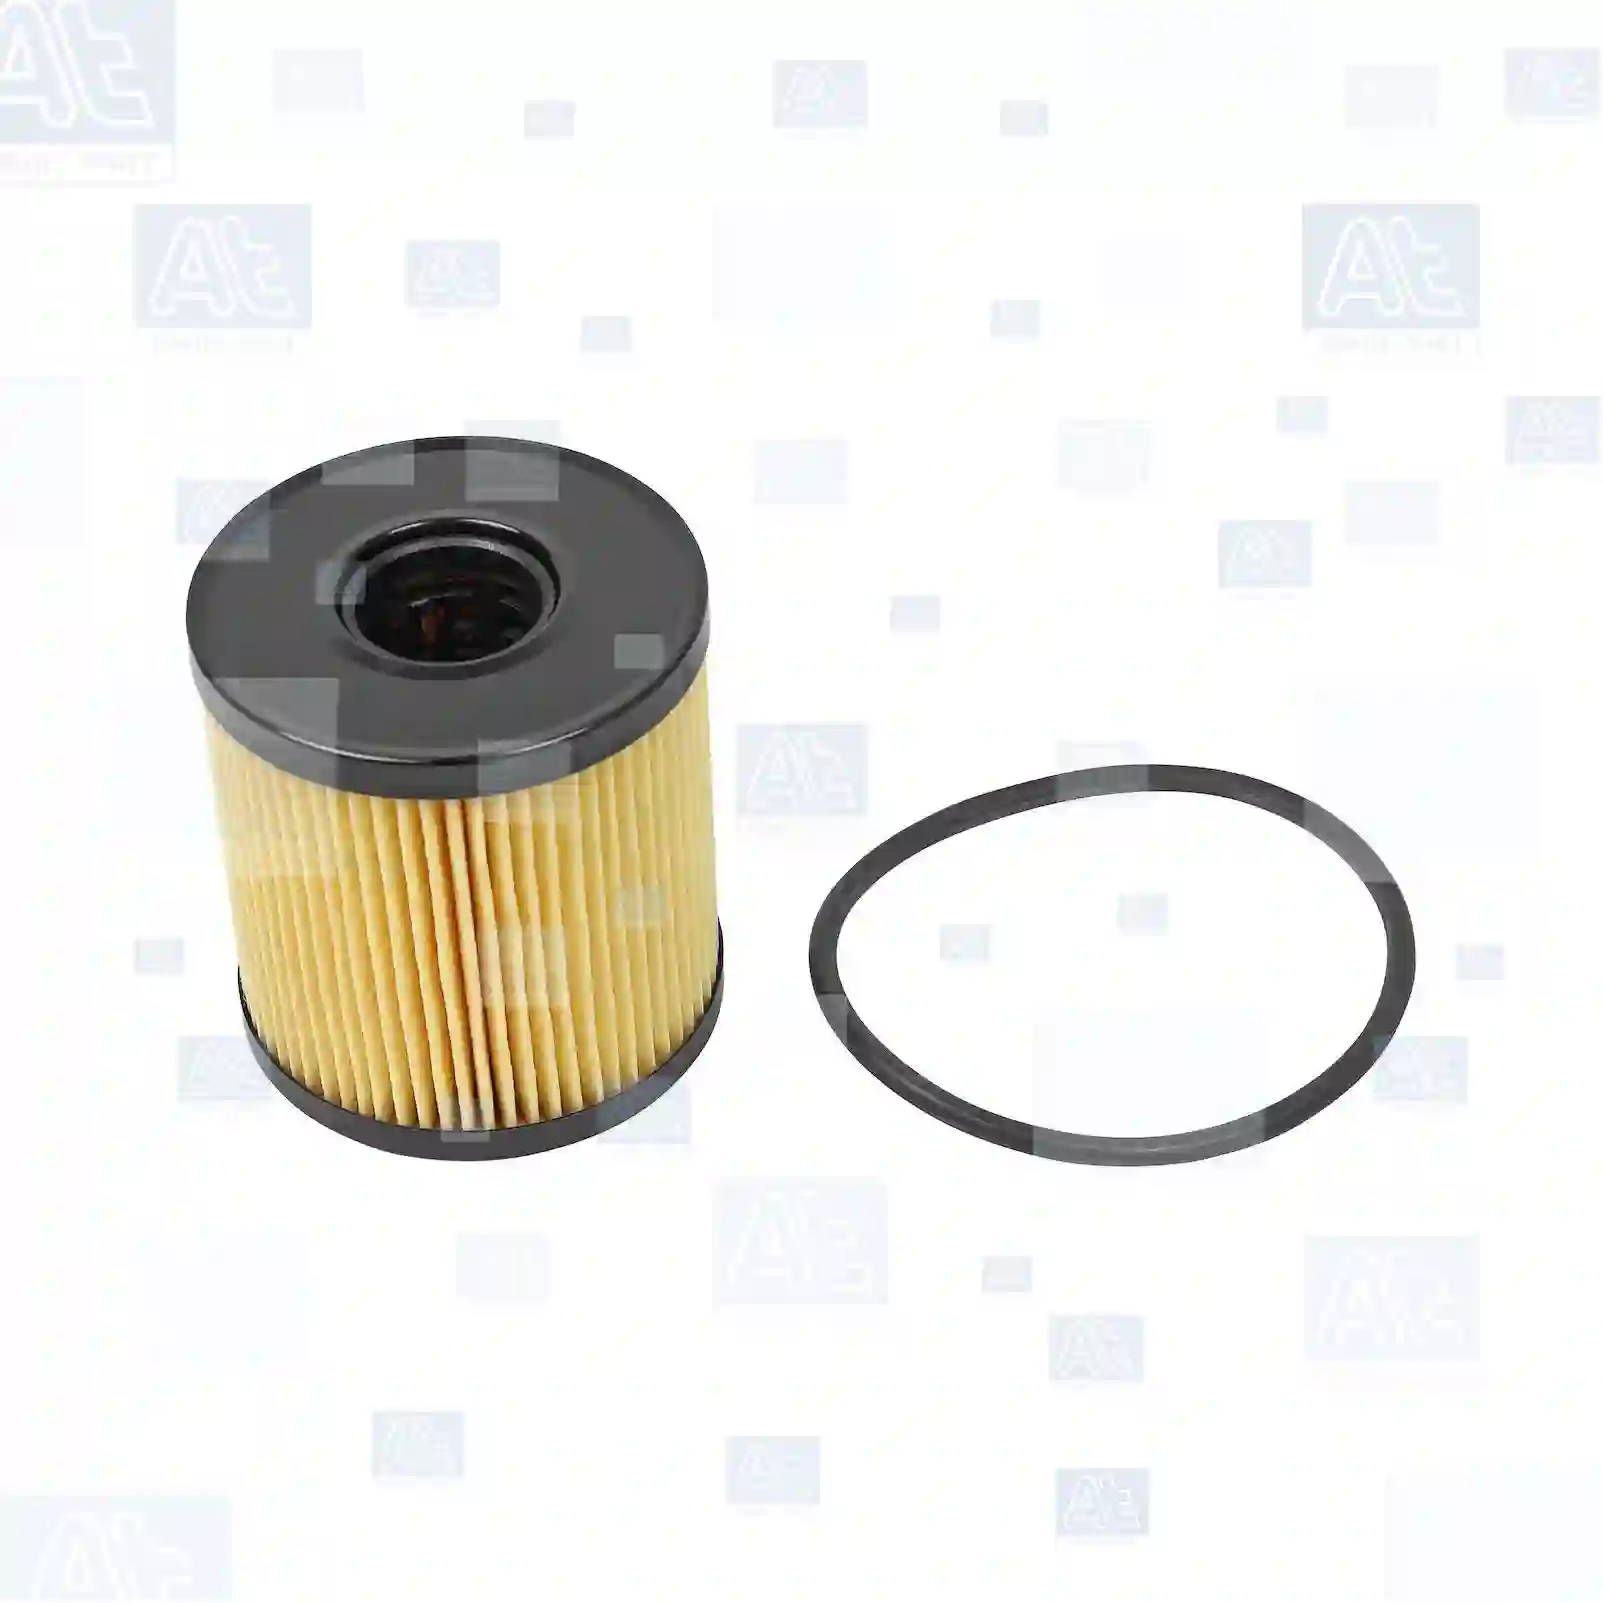 Oil filter insert, 77703153, 11427557012, 11427622446, 7622446, 01109A, 0119X4, 1109AH, 1109AJ, 1109CK, 1109CL, 1109L6, 1109X3, 1109X4, 1109Y9, 1109Z0, 1109Z1, 1109Z2, 9467645080, 9467645180, 9818914980, 982324, 1109AH, 9467521180, 9467558380, 9662282580, 1256739, 1303476, 1373069, 1427824, 1427846, 1717510, 1727561, 3M5Q-6744-AA, 6C1Q-6744-AA, 6C1Q-6744-BA, 9662282580, C2S43999, C2S52524, 9467521180, 9467558380, 9662282580, LR001247, LR001261, LR004459, LR028438, LR030778, 11427557012, 11427622446, MN982159, MN982324, MN982380, MN982419, TS200007, 01109A, 0119X4, 1109AH, 1109AJ, 1109CK, 1109CL, 1109L6, 1109X3, 1109X4, 1109Y9, 1109Z0, 1109Z1, 1109Z2, 9467645080, 9467645180, 9818914980, 982324, LR001247, LR004459, SU001-A0178, 30650798, 31372700, 31375029, ZG01732-0008 ||  77703153 At Spare Part | Engine, Accelerator Pedal, Camshaft, Connecting Rod, Crankcase, Crankshaft, Cylinder Head, Engine Suspension Mountings, Exhaust Manifold, Exhaust Gas Recirculation, Filter Kits, Flywheel Housing, General Overhaul Kits, Engine, Intake Manifold, Oil Cleaner, Oil Cooler, Oil Filter, Oil Pump, Oil Sump, Piston & Liner, Sensor & Switch, Timing Case, Turbocharger, Cooling System, Belt Tensioner, Coolant Filter, Coolant Pipe, Corrosion Prevention Agent, Drive, Expansion Tank, Fan, Intercooler, Monitors & Gauges, Radiator, Thermostat, V-Belt / Timing belt, Water Pump, Fuel System, Electronical Injector Unit, Feed Pump, Fuel Filter, cpl., Fuel Gauge Sender,  Fuel Line, Fuel Pump, Fuel Tank, Injection Line Kit, Injection Pump, Exhaust System, Clutch & Pedal, Gearbox, Propeller Shaft, Axles, Brake System, Hubs & Wheels, Suspension, Leaf Spring, Universal Parts / Accessories, Steering, Electrical System, Cabin Oil filter insert, 77703153, 11427557012, 11427622446, 7622446, 01109A, 0119X4, 1109AH, 1109AJ, 1109CK, 1109CL, 1109L6, 1109X3, 1109X4, 1109Y9, 1109Z0, 1109Z1, 1109Z2, 9467645080, 9467645180, 9818914980, 982324, 1109AH, 9467521180, 9467558380, 9662282580, 1256739, 1303476, 1373069, 1427824, 1427846, 1717510, 1727561, 3M5Q-6744-AA, 6C1Q-6744-AA, 6C1Q-6744-BA, 9662282580, C2S43999, C2S52524, 9467521180, 9467558380, 9662282580, LR001247, LR001261, LR004459, LR028438, LR030778, 11427557012, 11427622446, MN982159, MN982324, MN982380, MN982419, TS200007, 01109A, 0119X4, 1109AH, 1109AJ, 1109CK, 1109CL, 1109L6, 1109X3, 1109X4, 1109Y9, 1109Z0, 1109Z1, 1109Z2, 9467645080, 9467645180, 9818914980, 982324, LR001247, LR004459, SU001-A0178, 30650798, 31372700, 31375029, ZG01732-0008 ||  77703153 At Spare Part | Engine, Accelerator Pedal, Camshaft, Connecting Rod, Crankcase, Crankshaft, Cylinder Head, Engine Suspension Mountings, Exhaust Manifold, Exhaust Gas Recirculation, Filter Kits, Flywheel Housing, General Overhaul Kits, Engine, Intake Manifold, Oil Cleaner, Oil Cooler, Oil Filter, Oil Pump, Oil Sump, Piston & Liner, Sensor & Switch, Timing Case, Turbocharger, Cooling System, Belt Tensioner, Coolant Filter, Coolant Pipe, Corrosion Prevention Agent, Drive, Expansion Tank, Fan, Intercooler, Monitors & Gauges, Radiator, Thermostat, V-Belt / Timing belt, Water Pump, Fuel System, Electronical Injector Unit, Feed Pump, Fuel Filter, cpl., Fuel Gauge Sender,  Fuel Line, Fuel Pump, Fuel Tank, Injection Line Kit, Injection Pump, Exhaust System, Clutch & Pedal, Gearbox, Propeller Shaft, Axles, Brake System, Hubs & Wheels, Suspension, Leaf Spring, Universal Parts / Accessories, Steering, Electrical System, Cabin